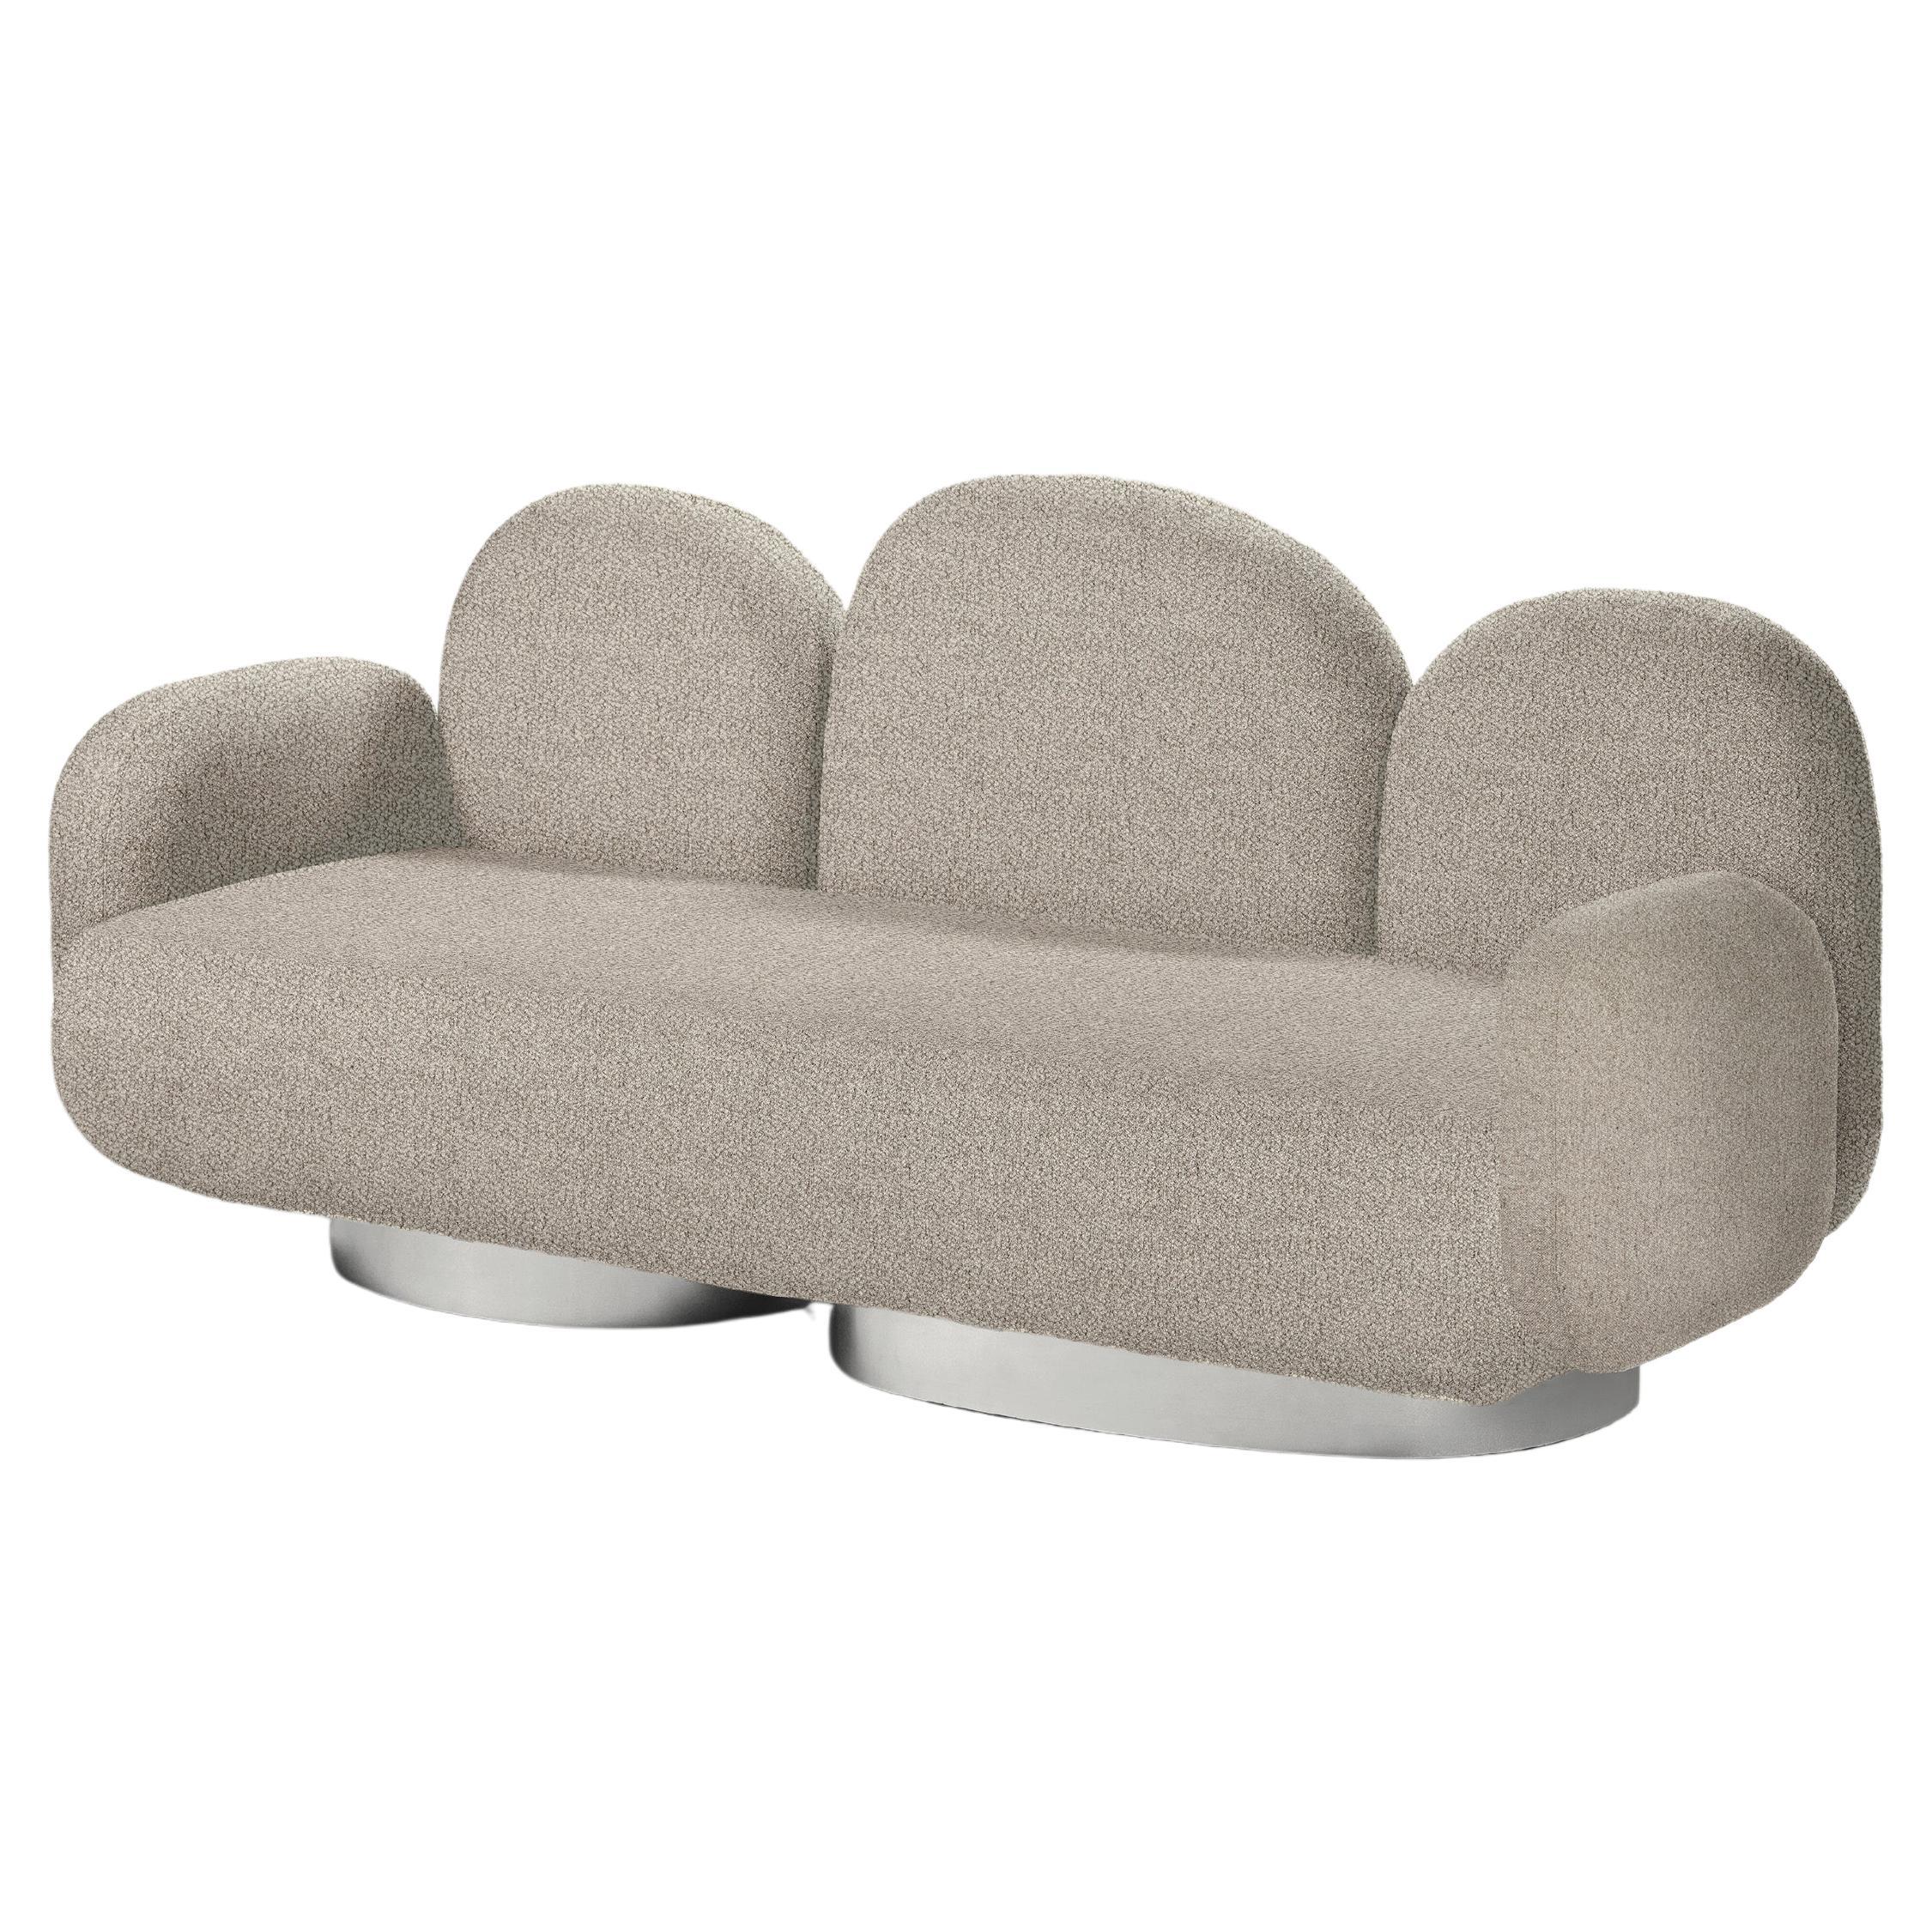 Contemporary Sofa 'Assemble' by Destroyers/Builders, 2 seaters + 2 armrests For Sale